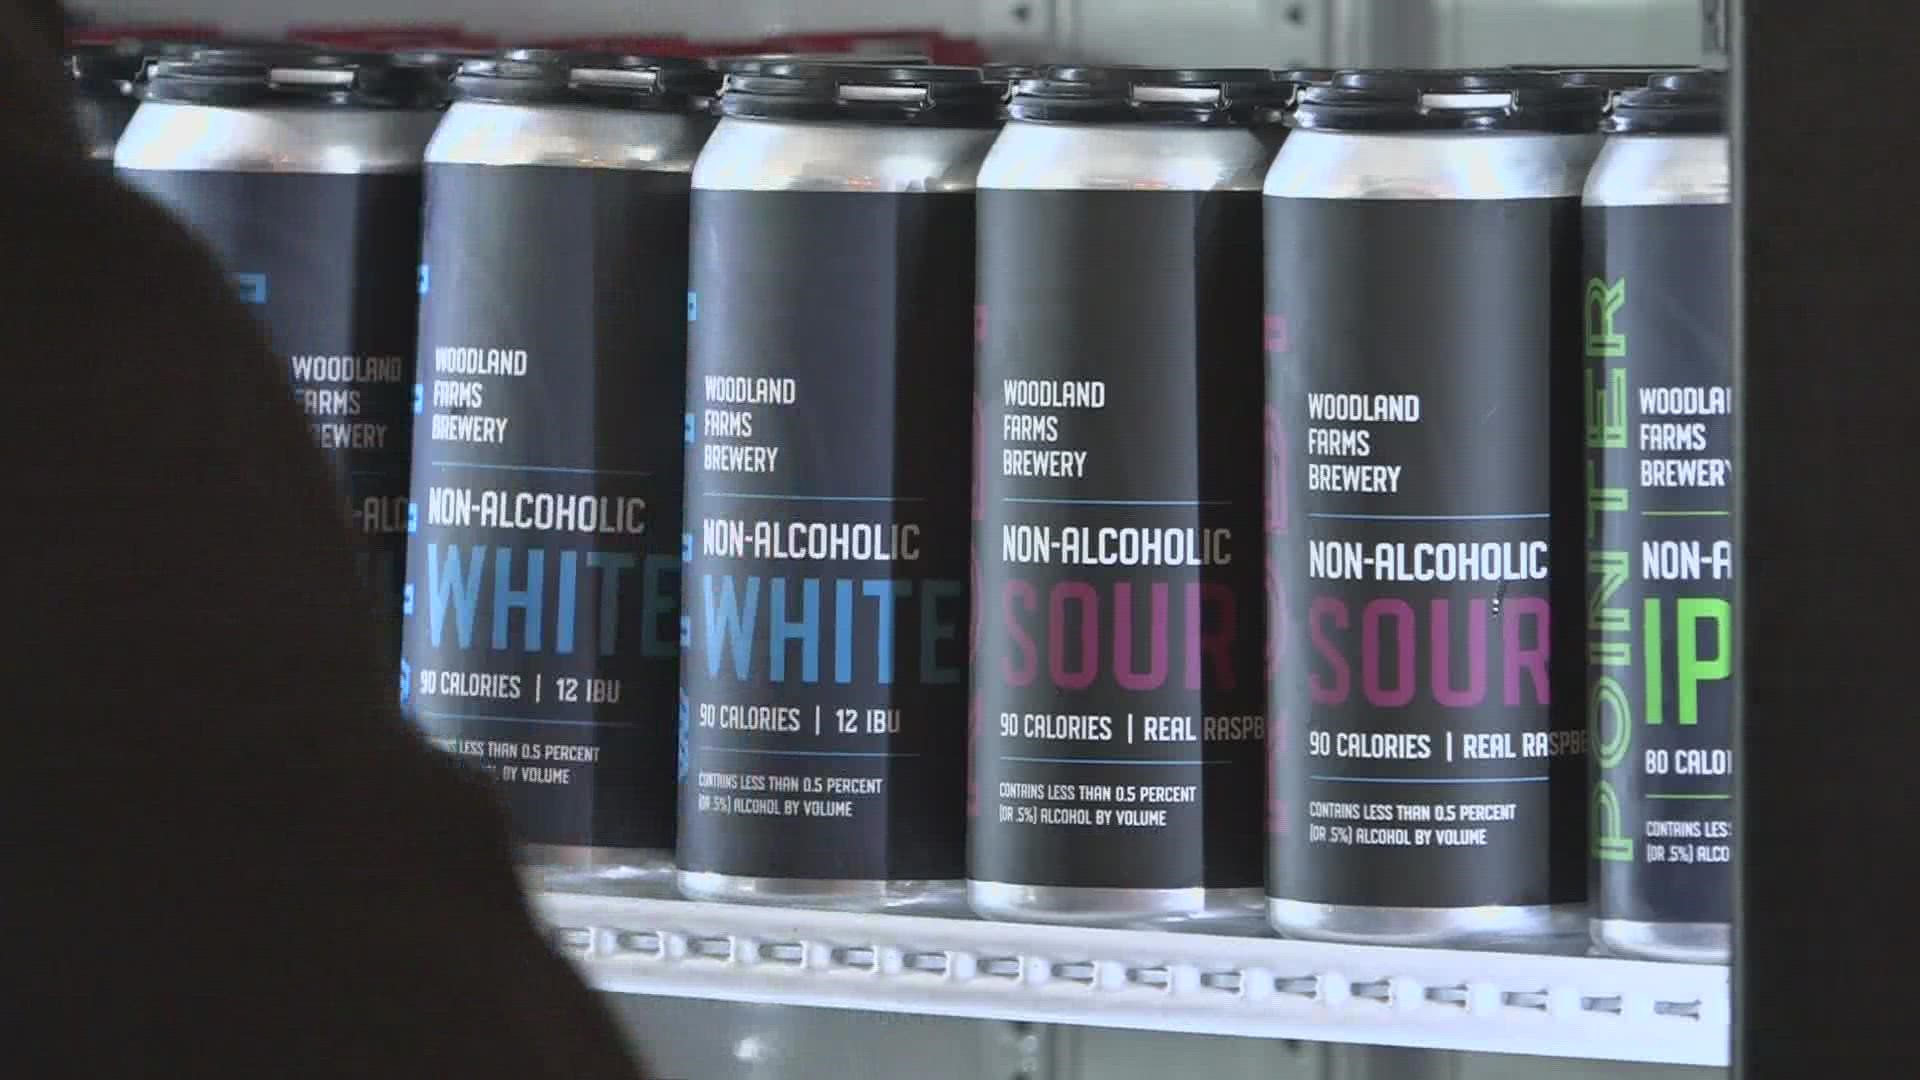 Brewers in Maine are working to create craft beer without the booze